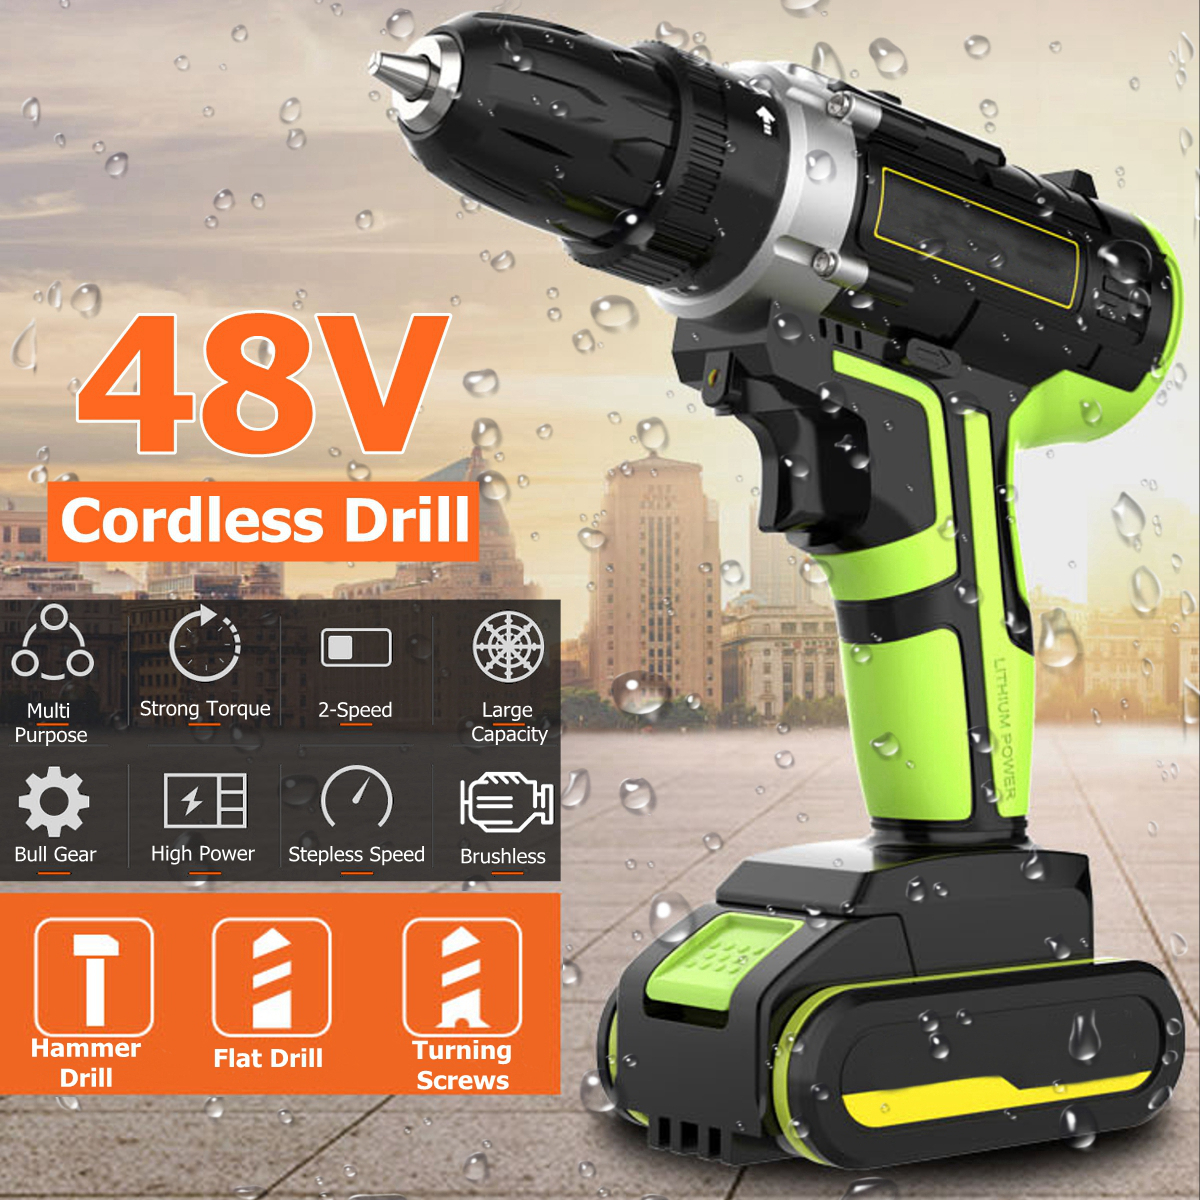 3 In 1 Hammer Drill 48V Cordless Drill Double Speed Power Drills LED lighting 1/2Pcs Large Capacity Battery 50Nm 25+1 Torque Electric Drill 15